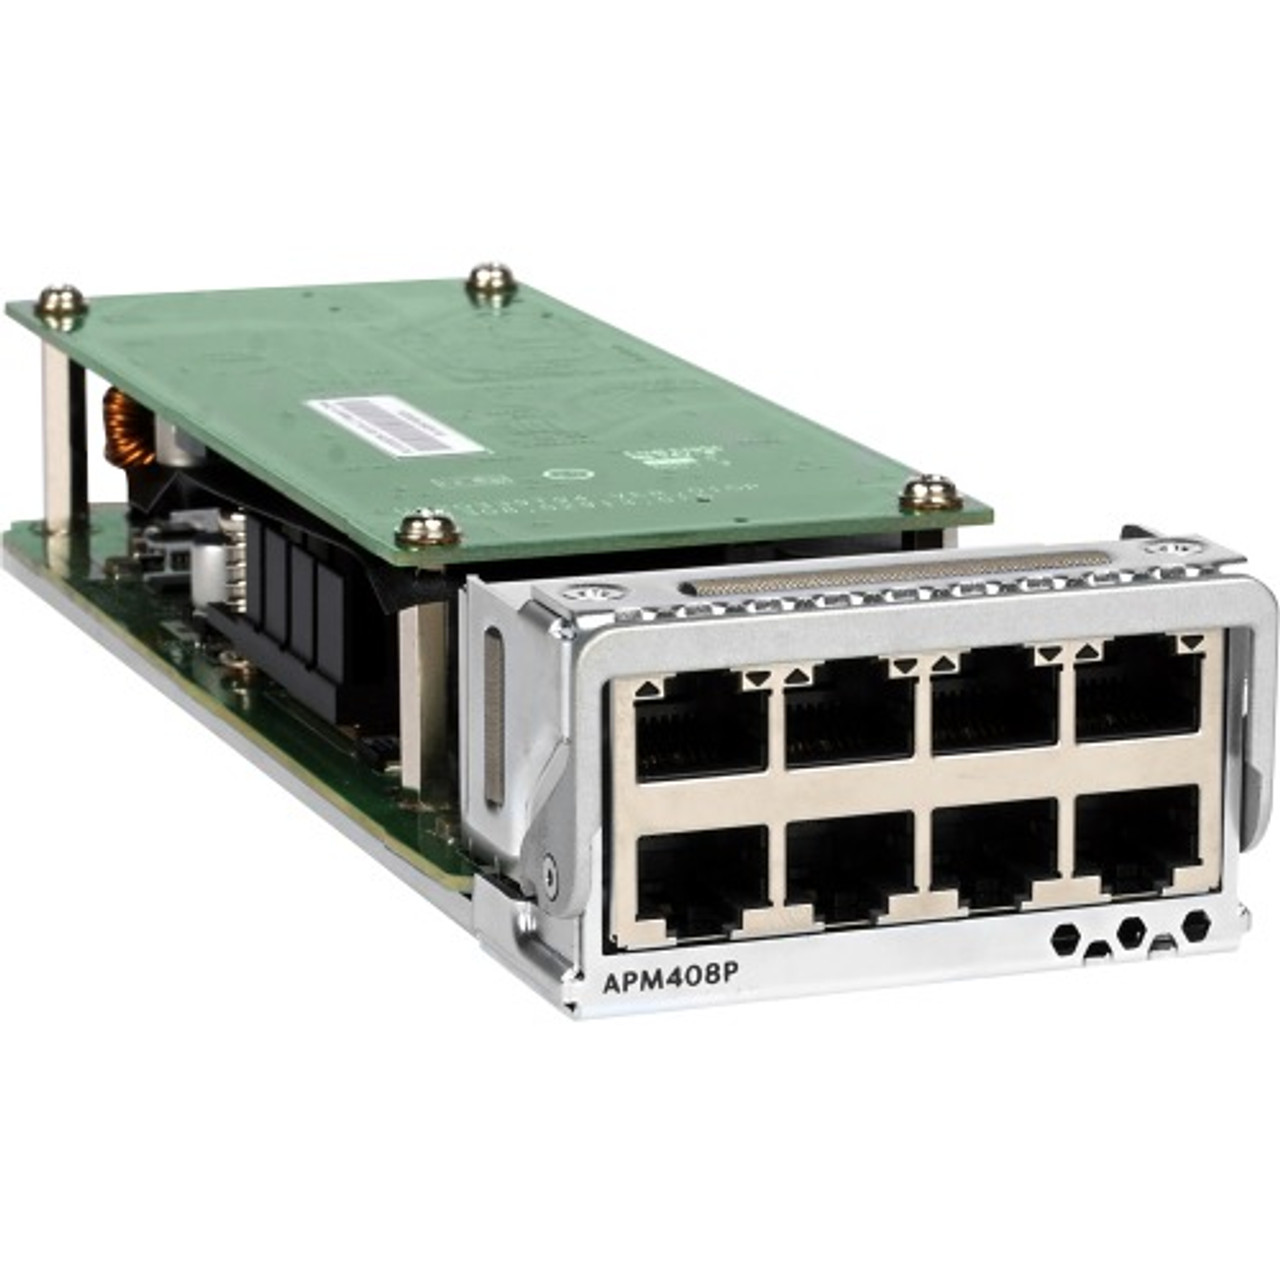 APM408P-10000S Netgear 8x100M/1G/2.5G/5G/10GBASE-T PoE+ Port Card For Data Networking 8 RJ-45 10GBase-T Network LAN Twisted Pair10 Gigabit Ethernet 10GBase-T